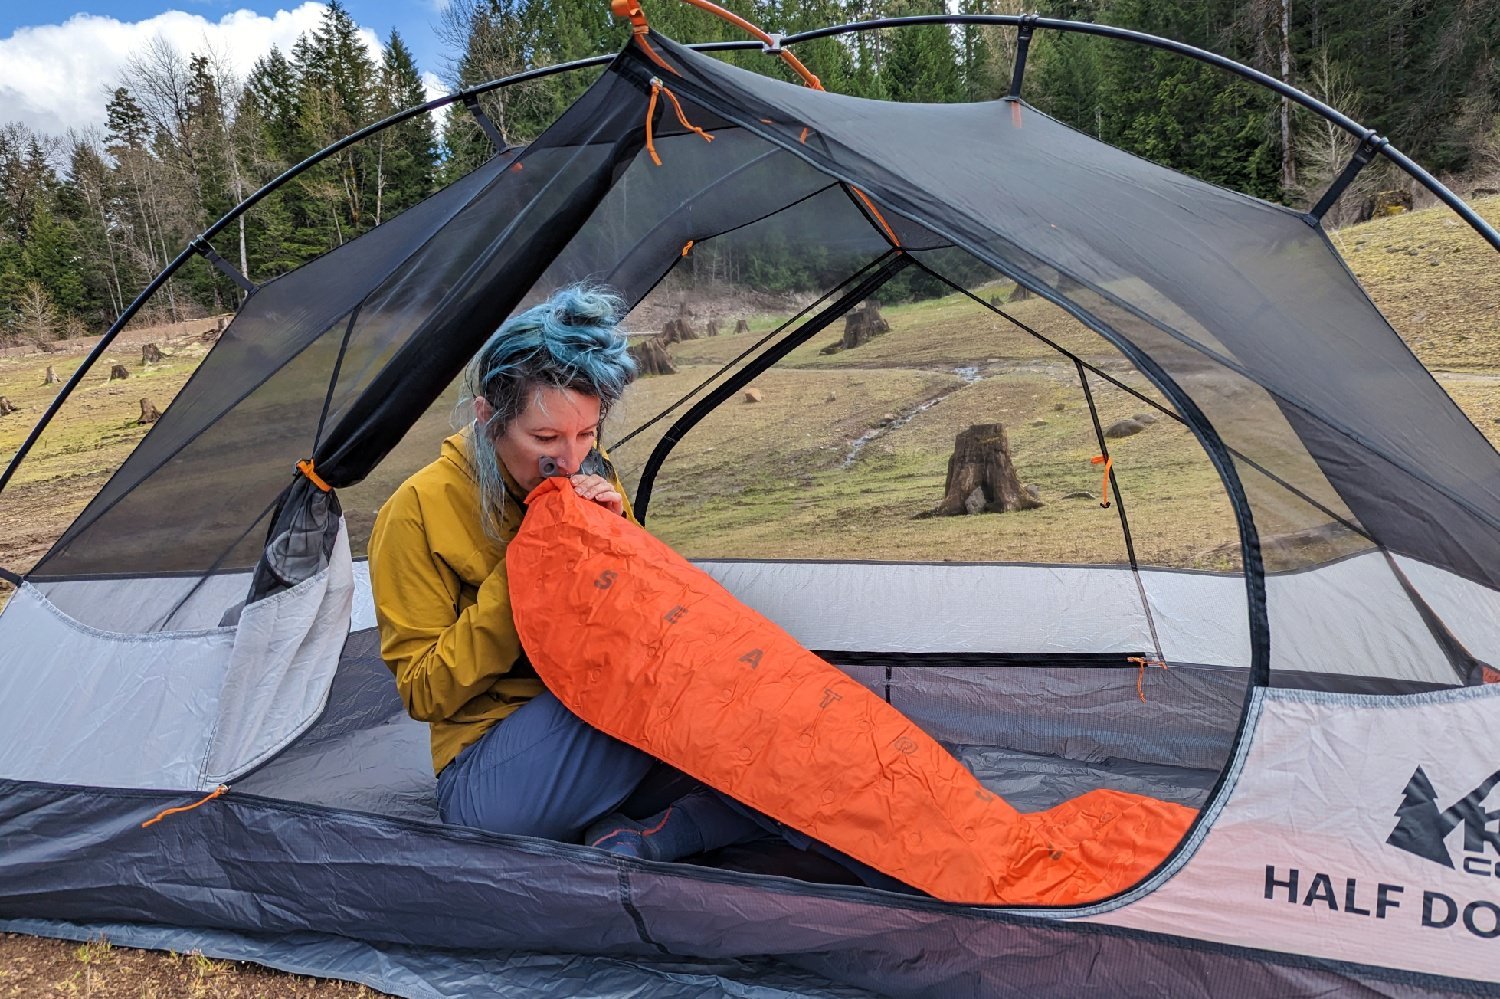 A hiker sitting in the REI Half Dome 2 with the door open - they are blowing up an orange sleeping pad